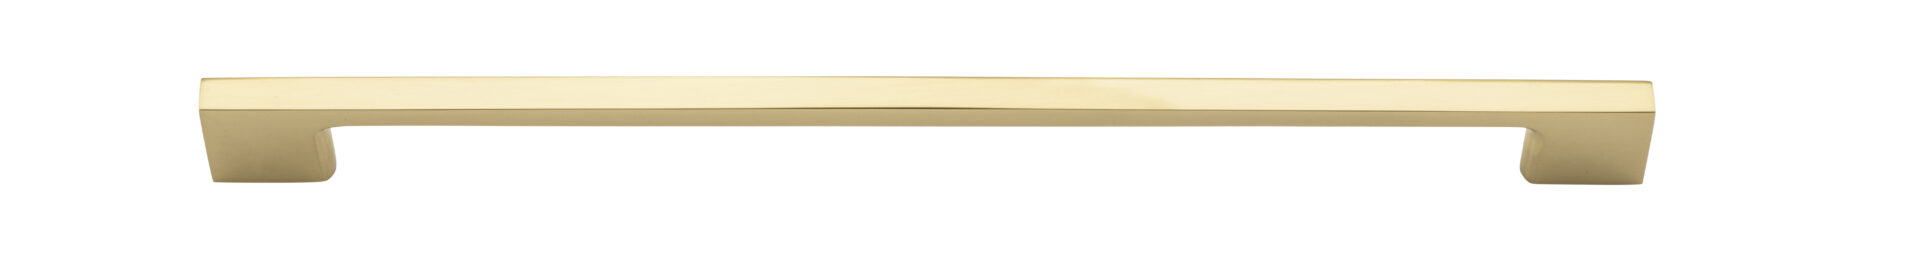 0517 - Cali Cabinet Pull - 256mm - Polished Brass